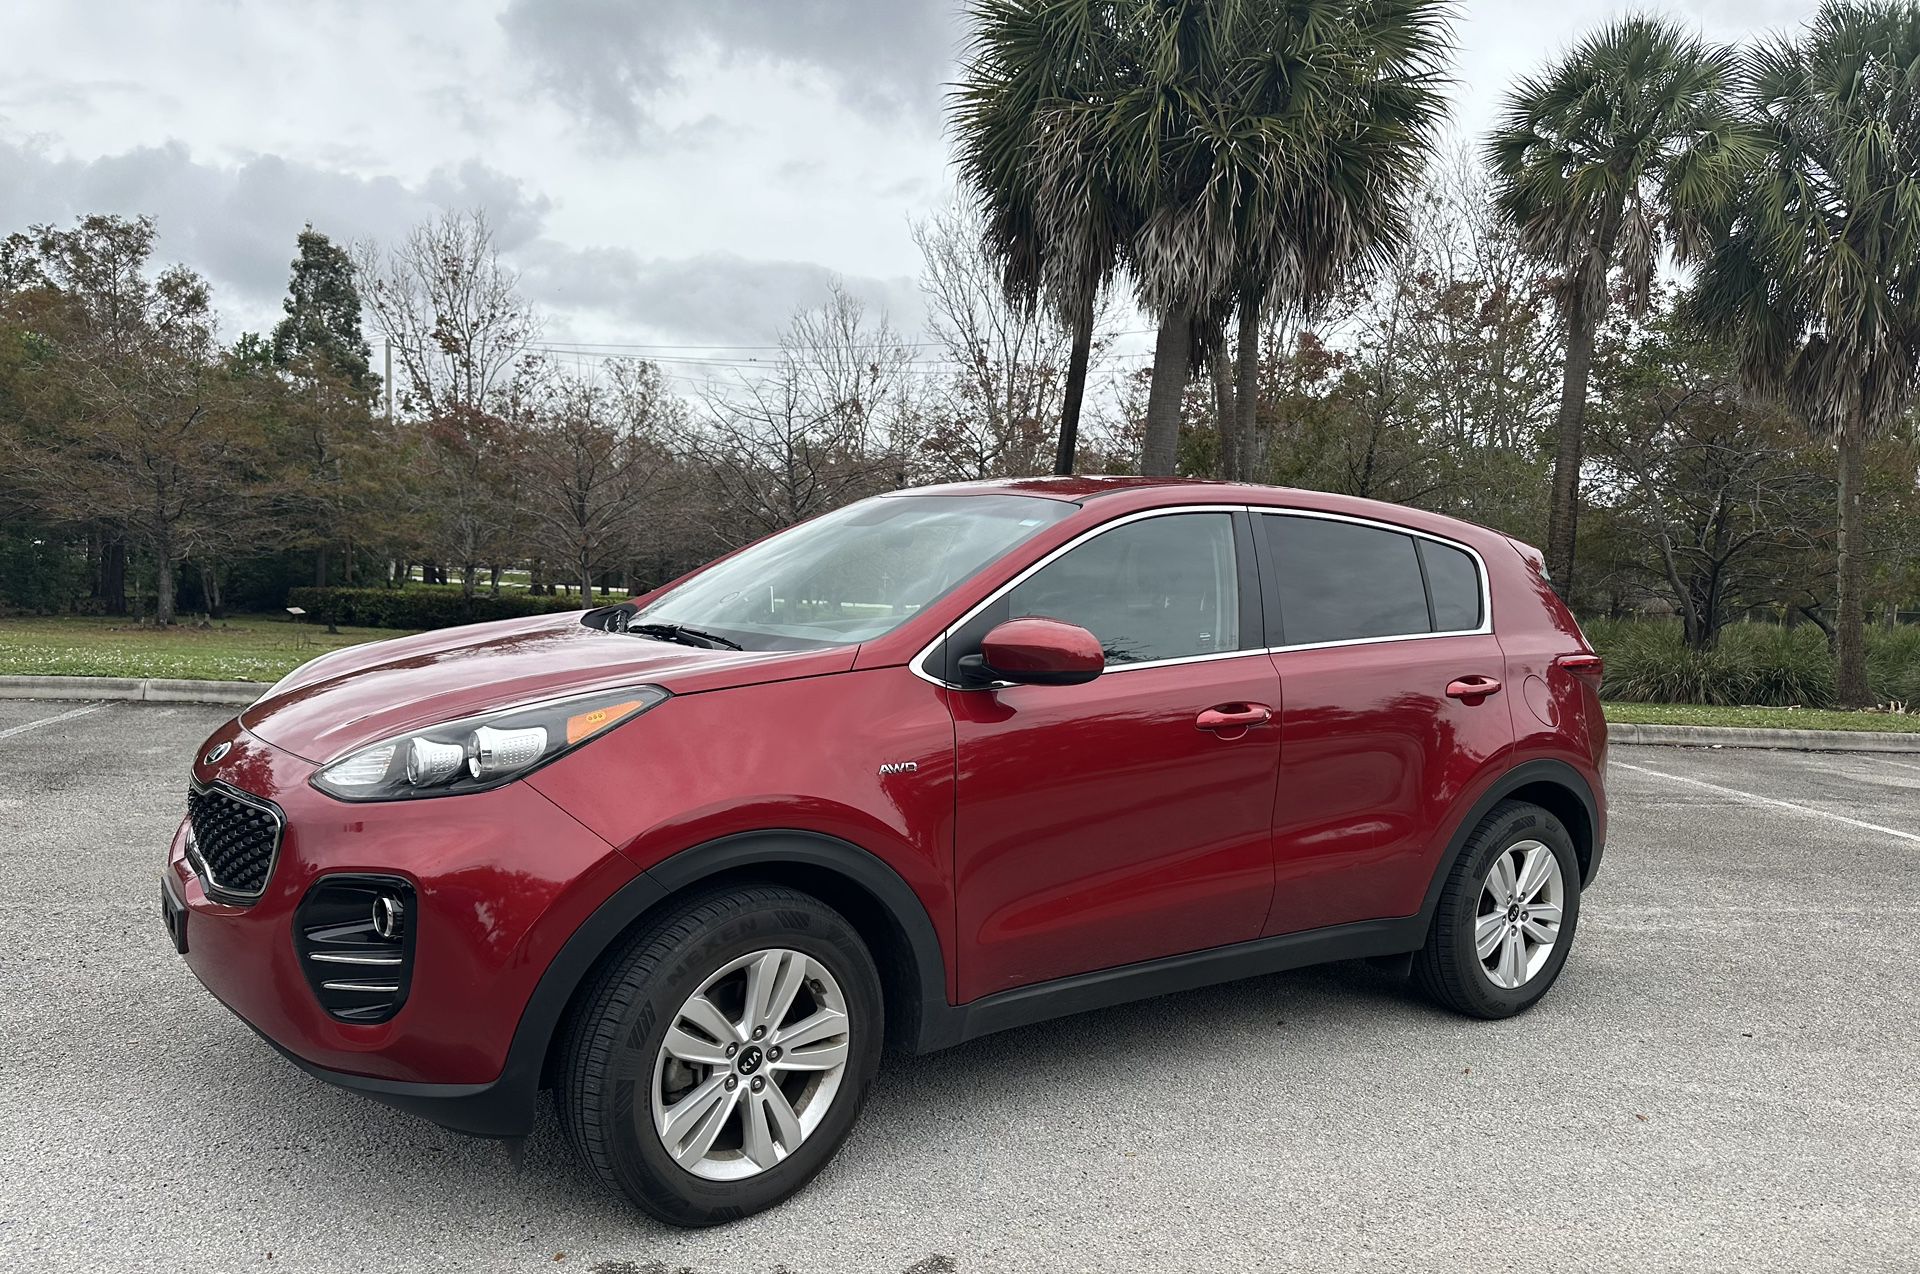 Kia Sportage Horrible Credit! Need A Car? Need A Break? I don’t Care About The Credit 